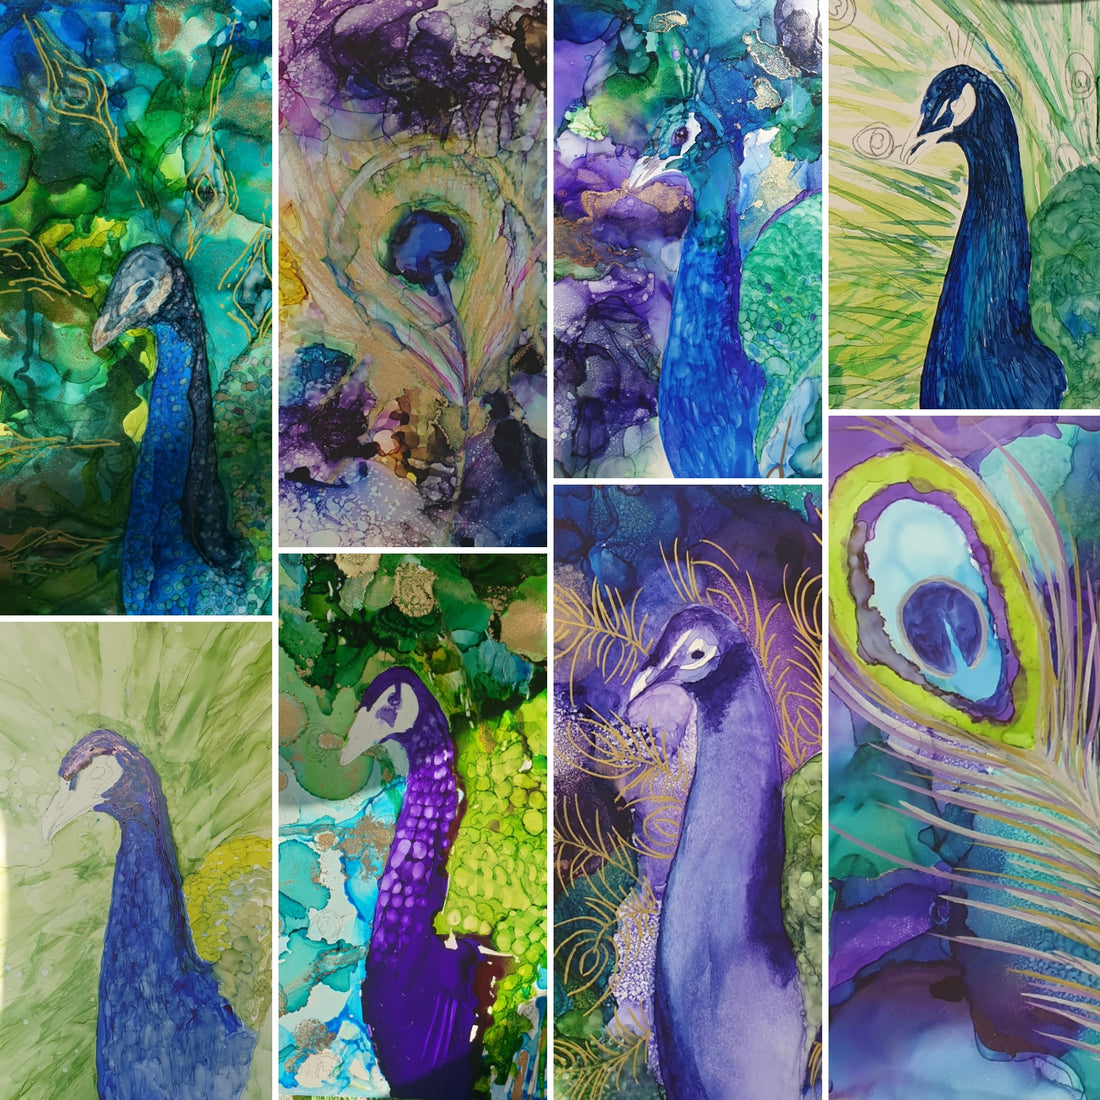 Brilliant time painting Peacocks!